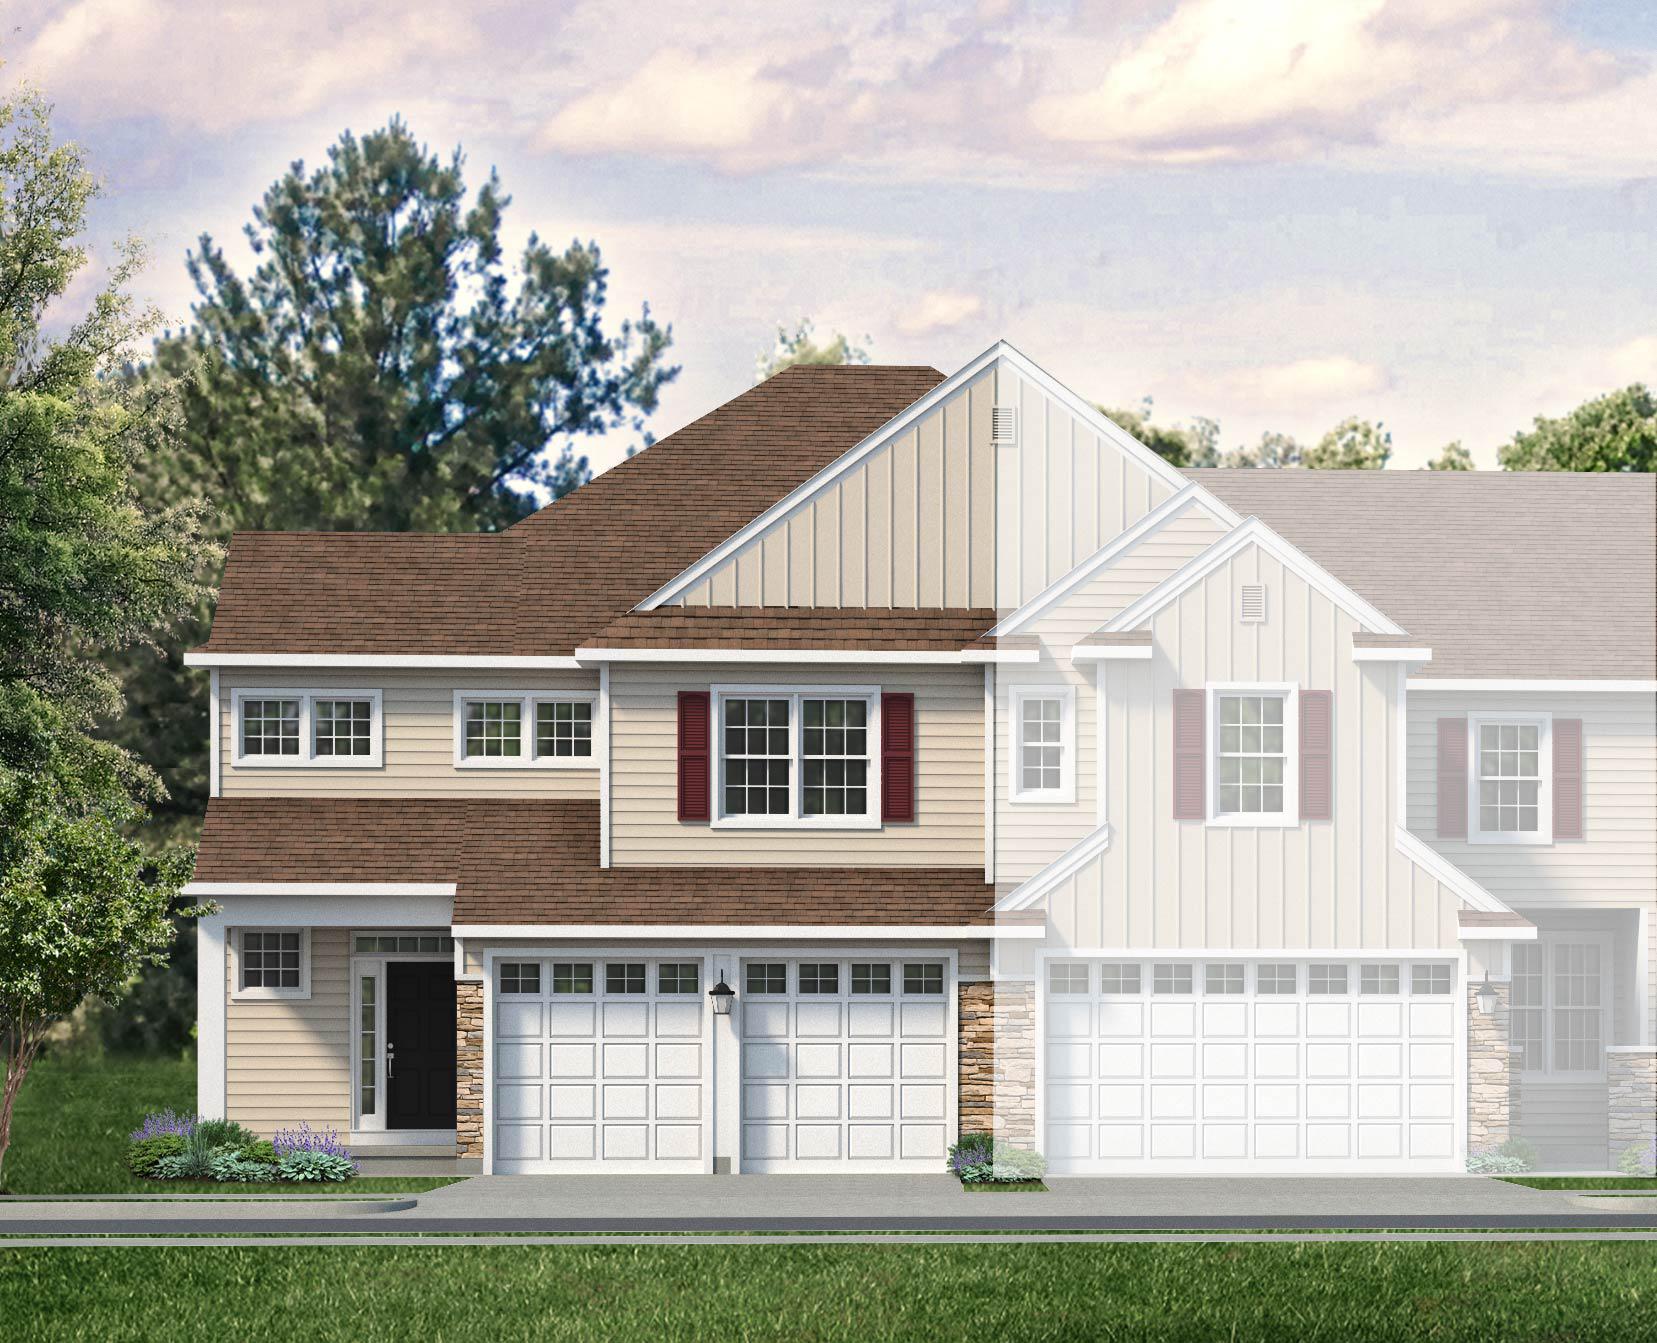 The Delaware Towns New Home in Easton PA - Riverview Estates